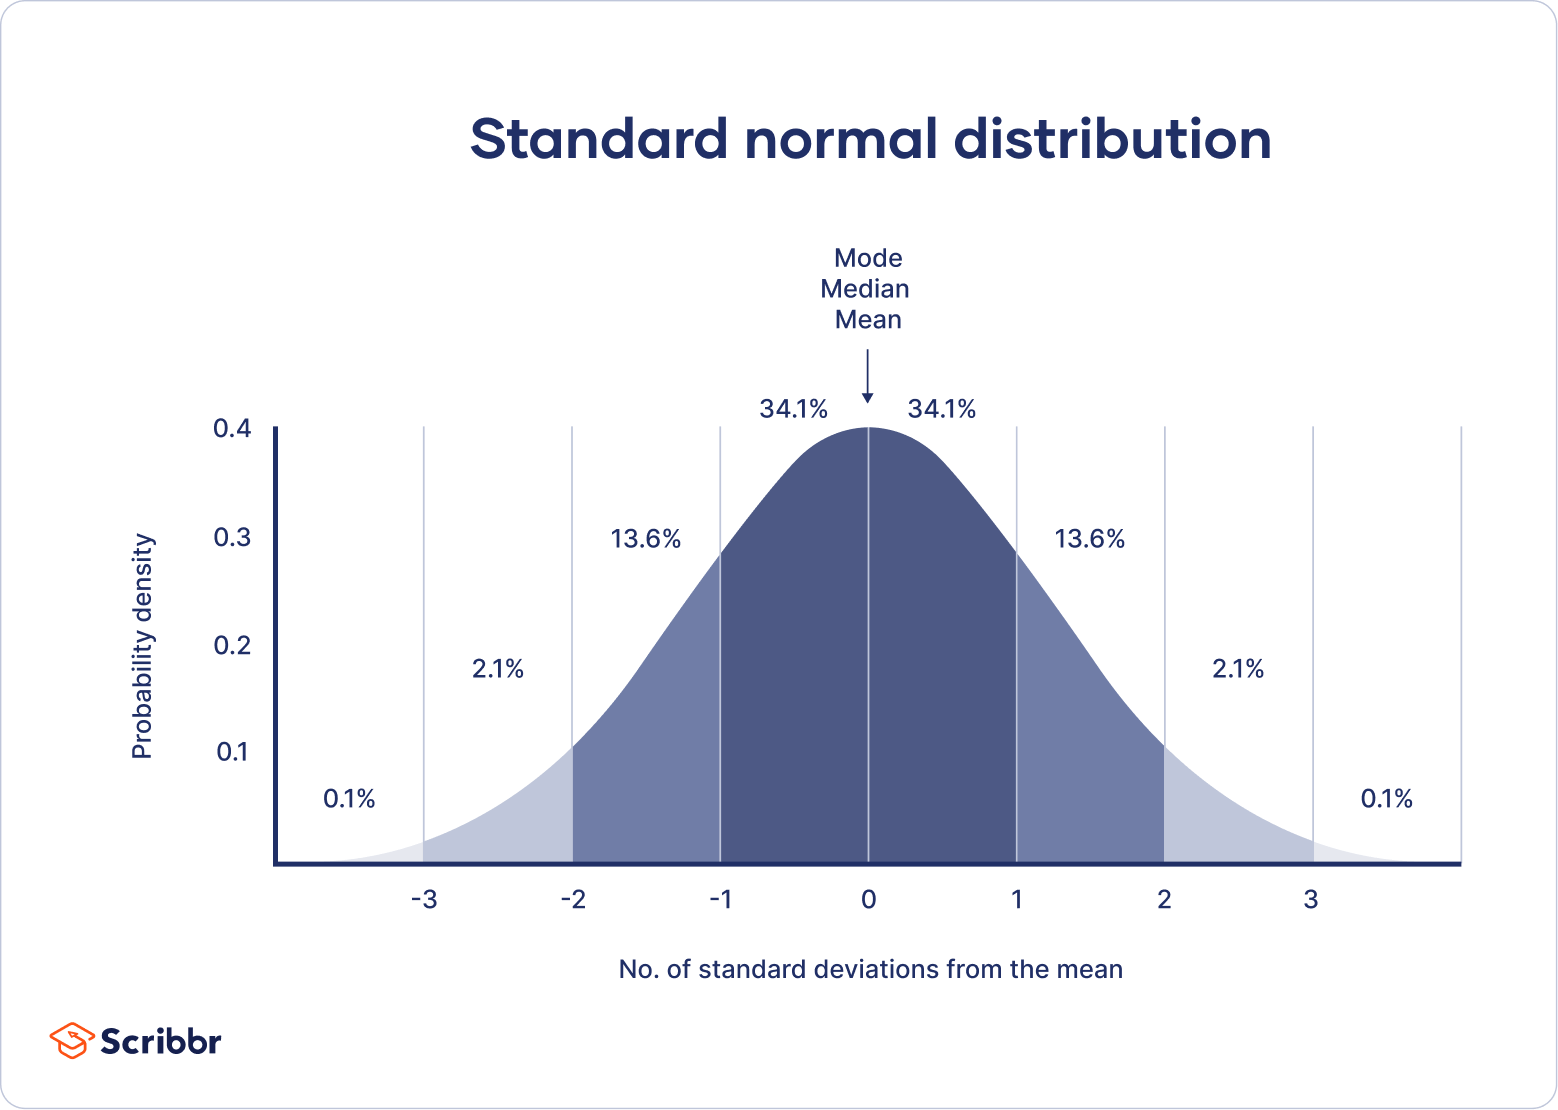 The standard normal distribution has a mean of 0 and a standard deviation of 1